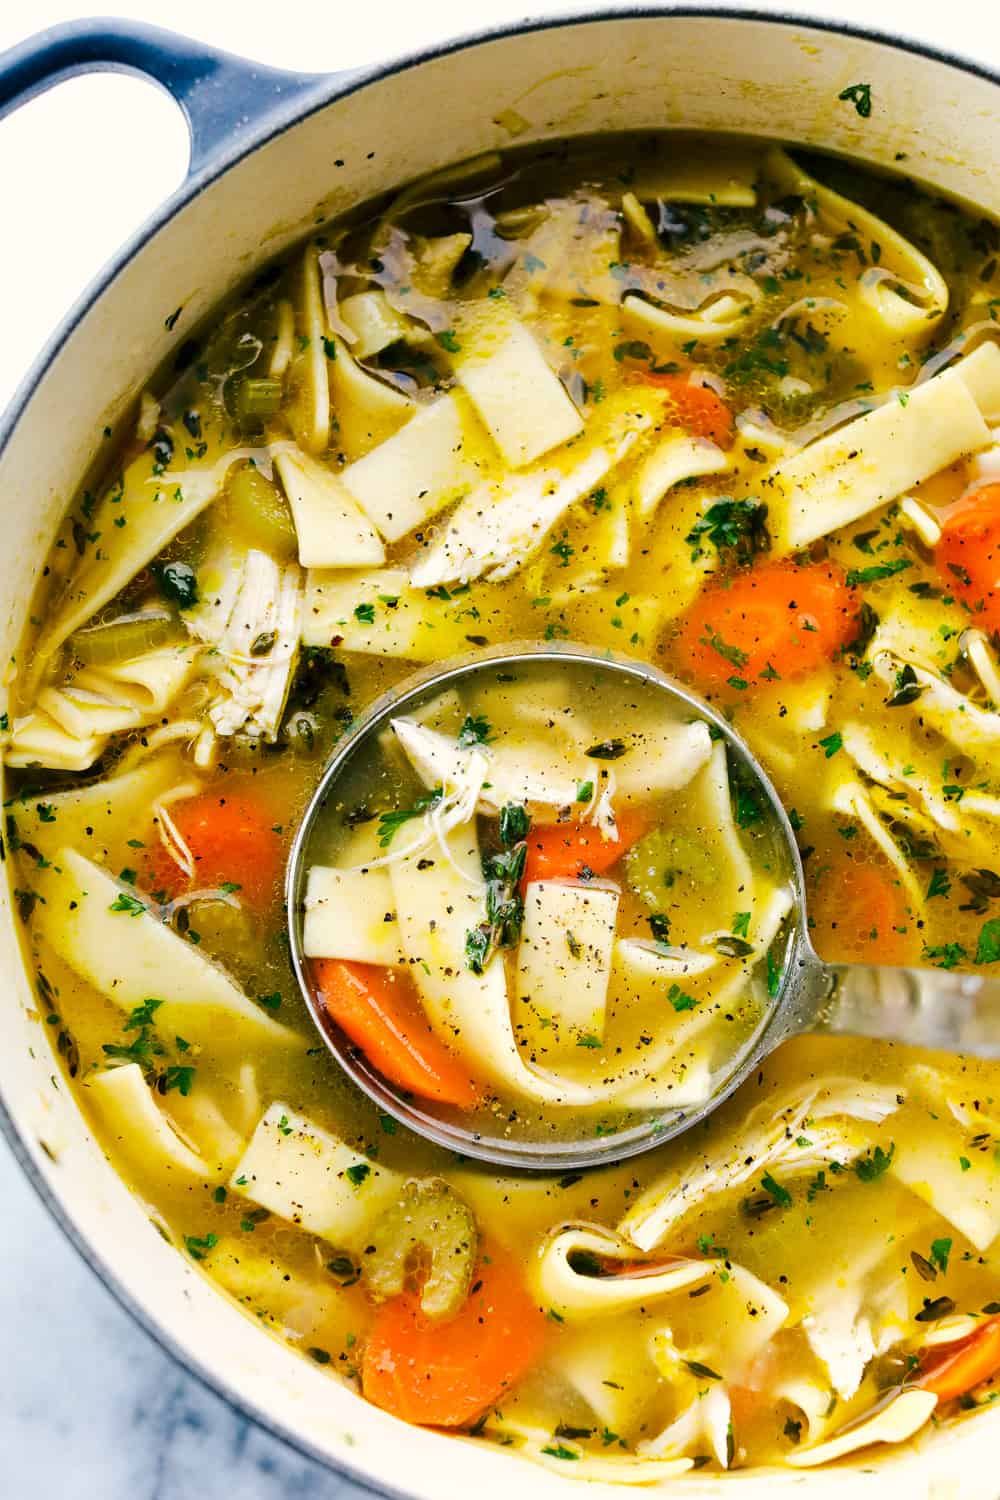 The History of Chicken Noodle Soup